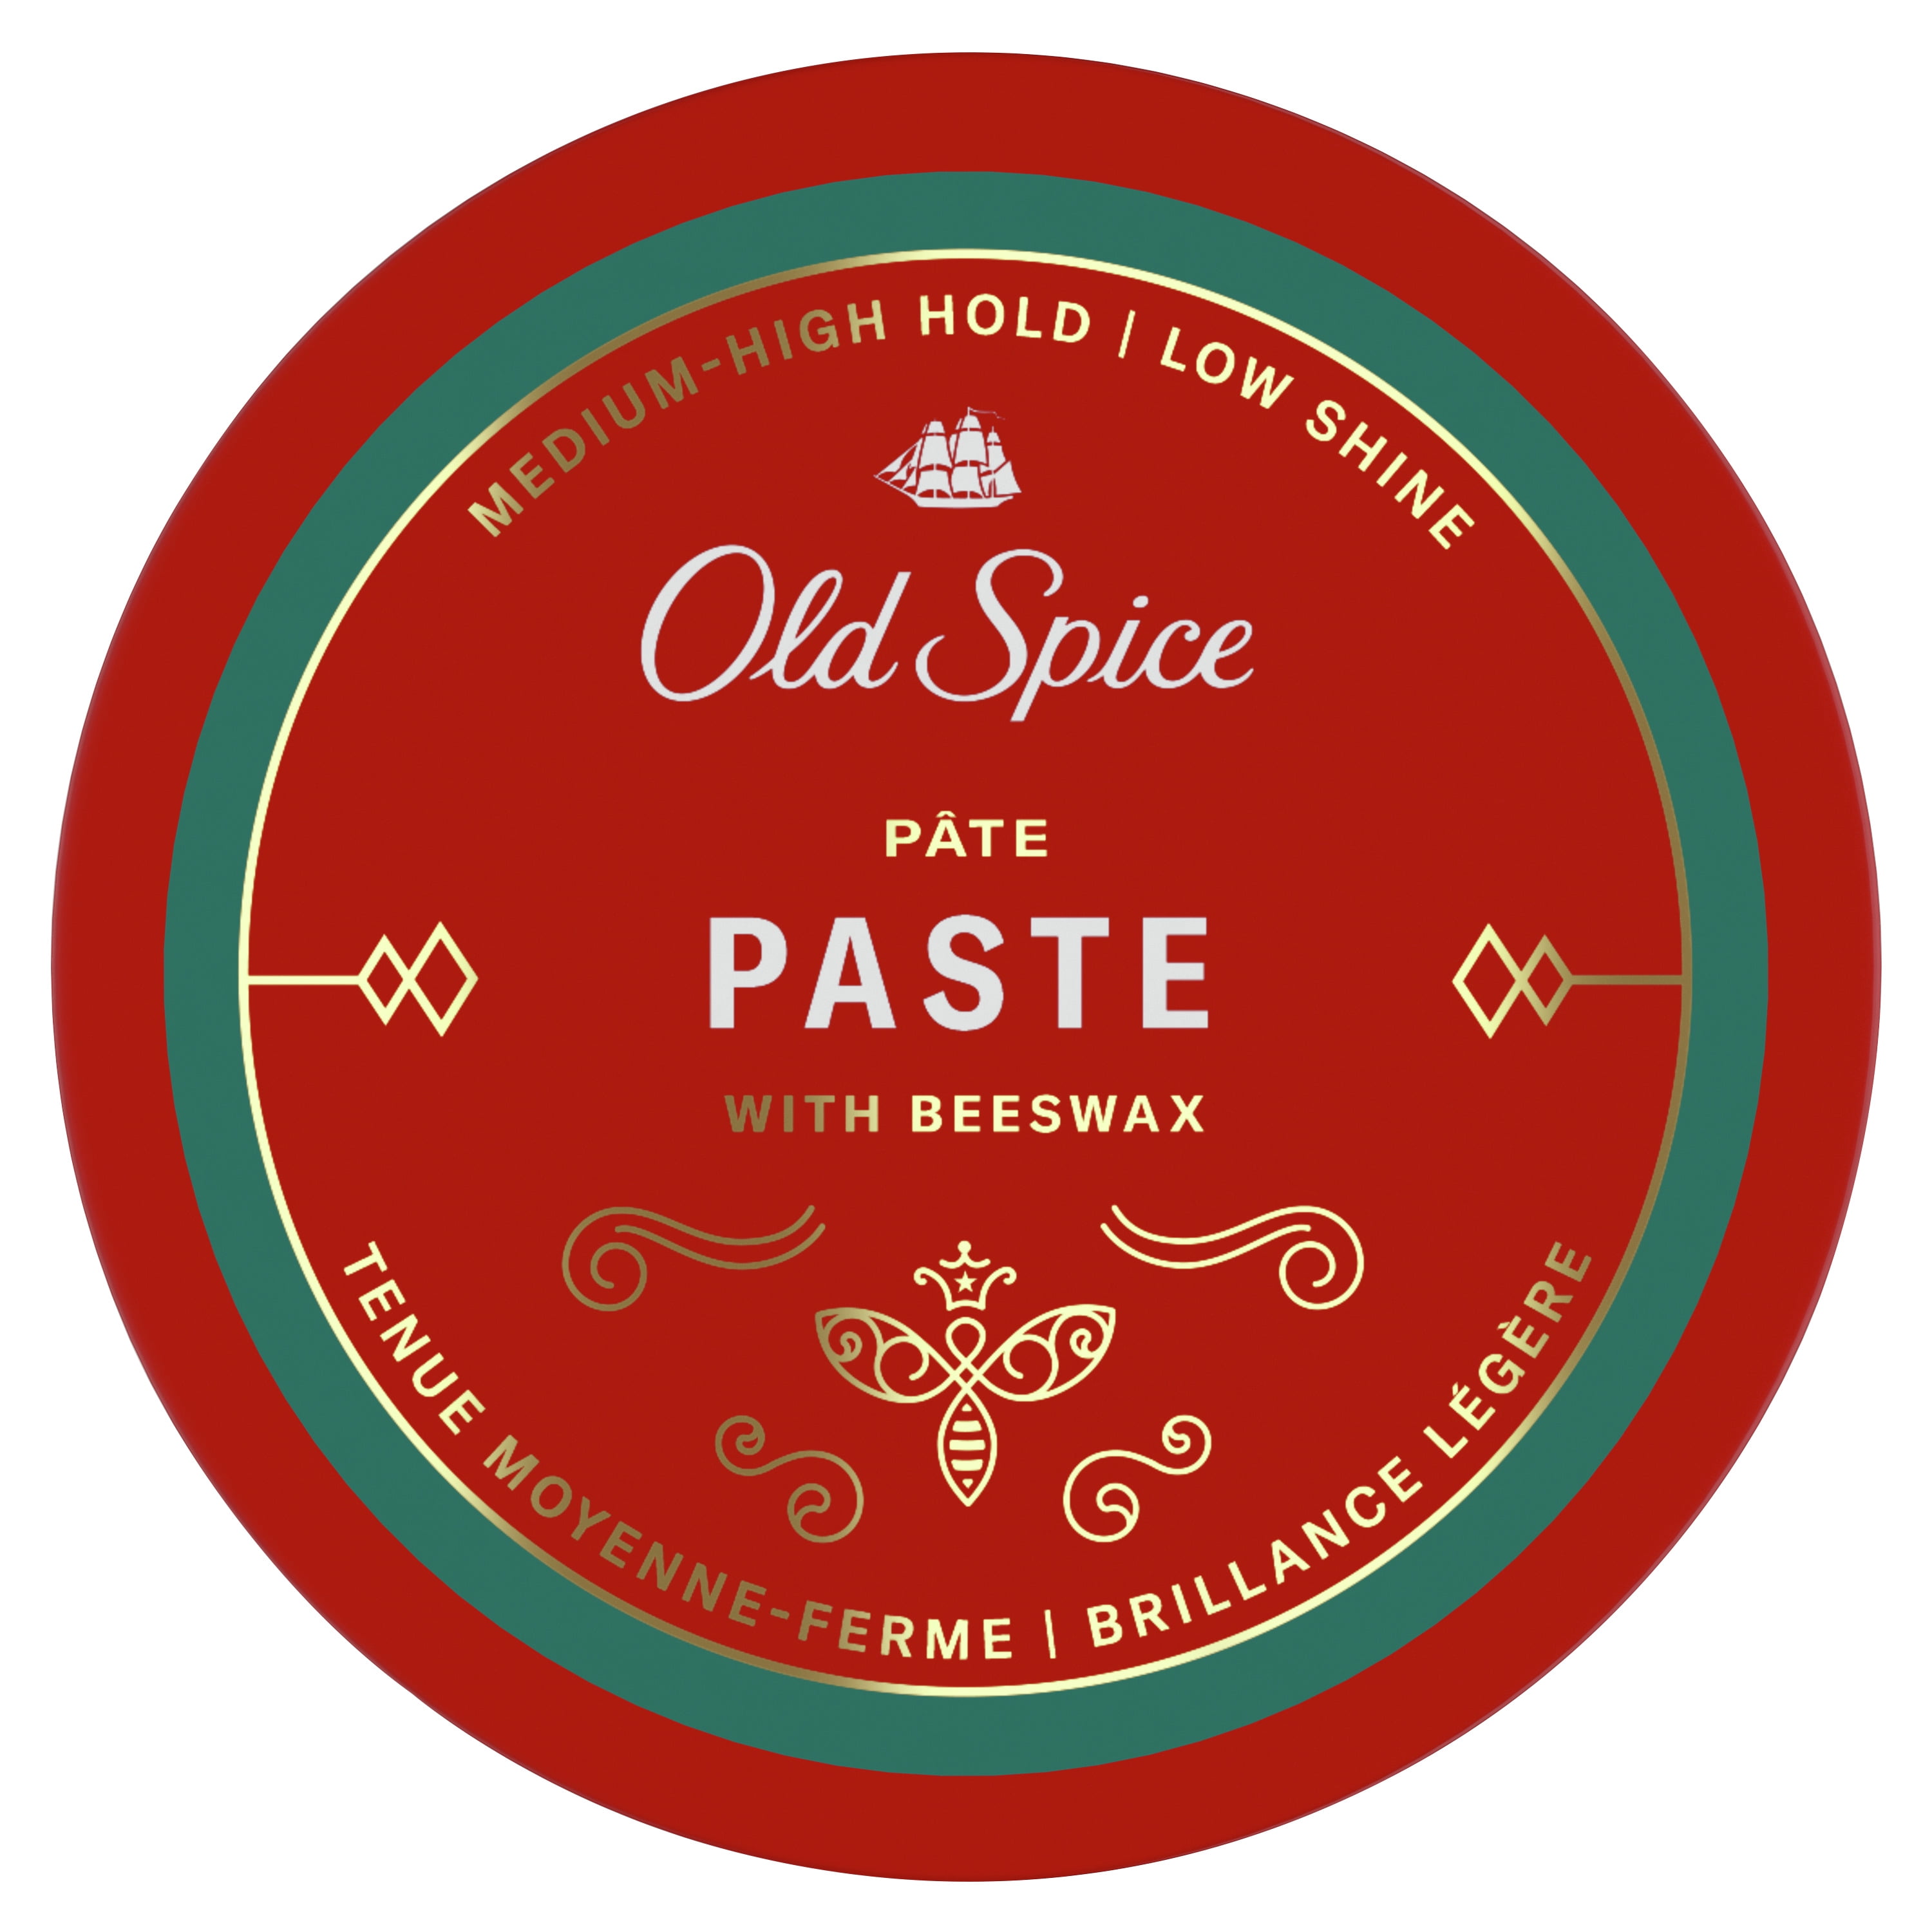 Old Spice Hair Styling Paste for Men, Medium to High Hold, 2.22 oz